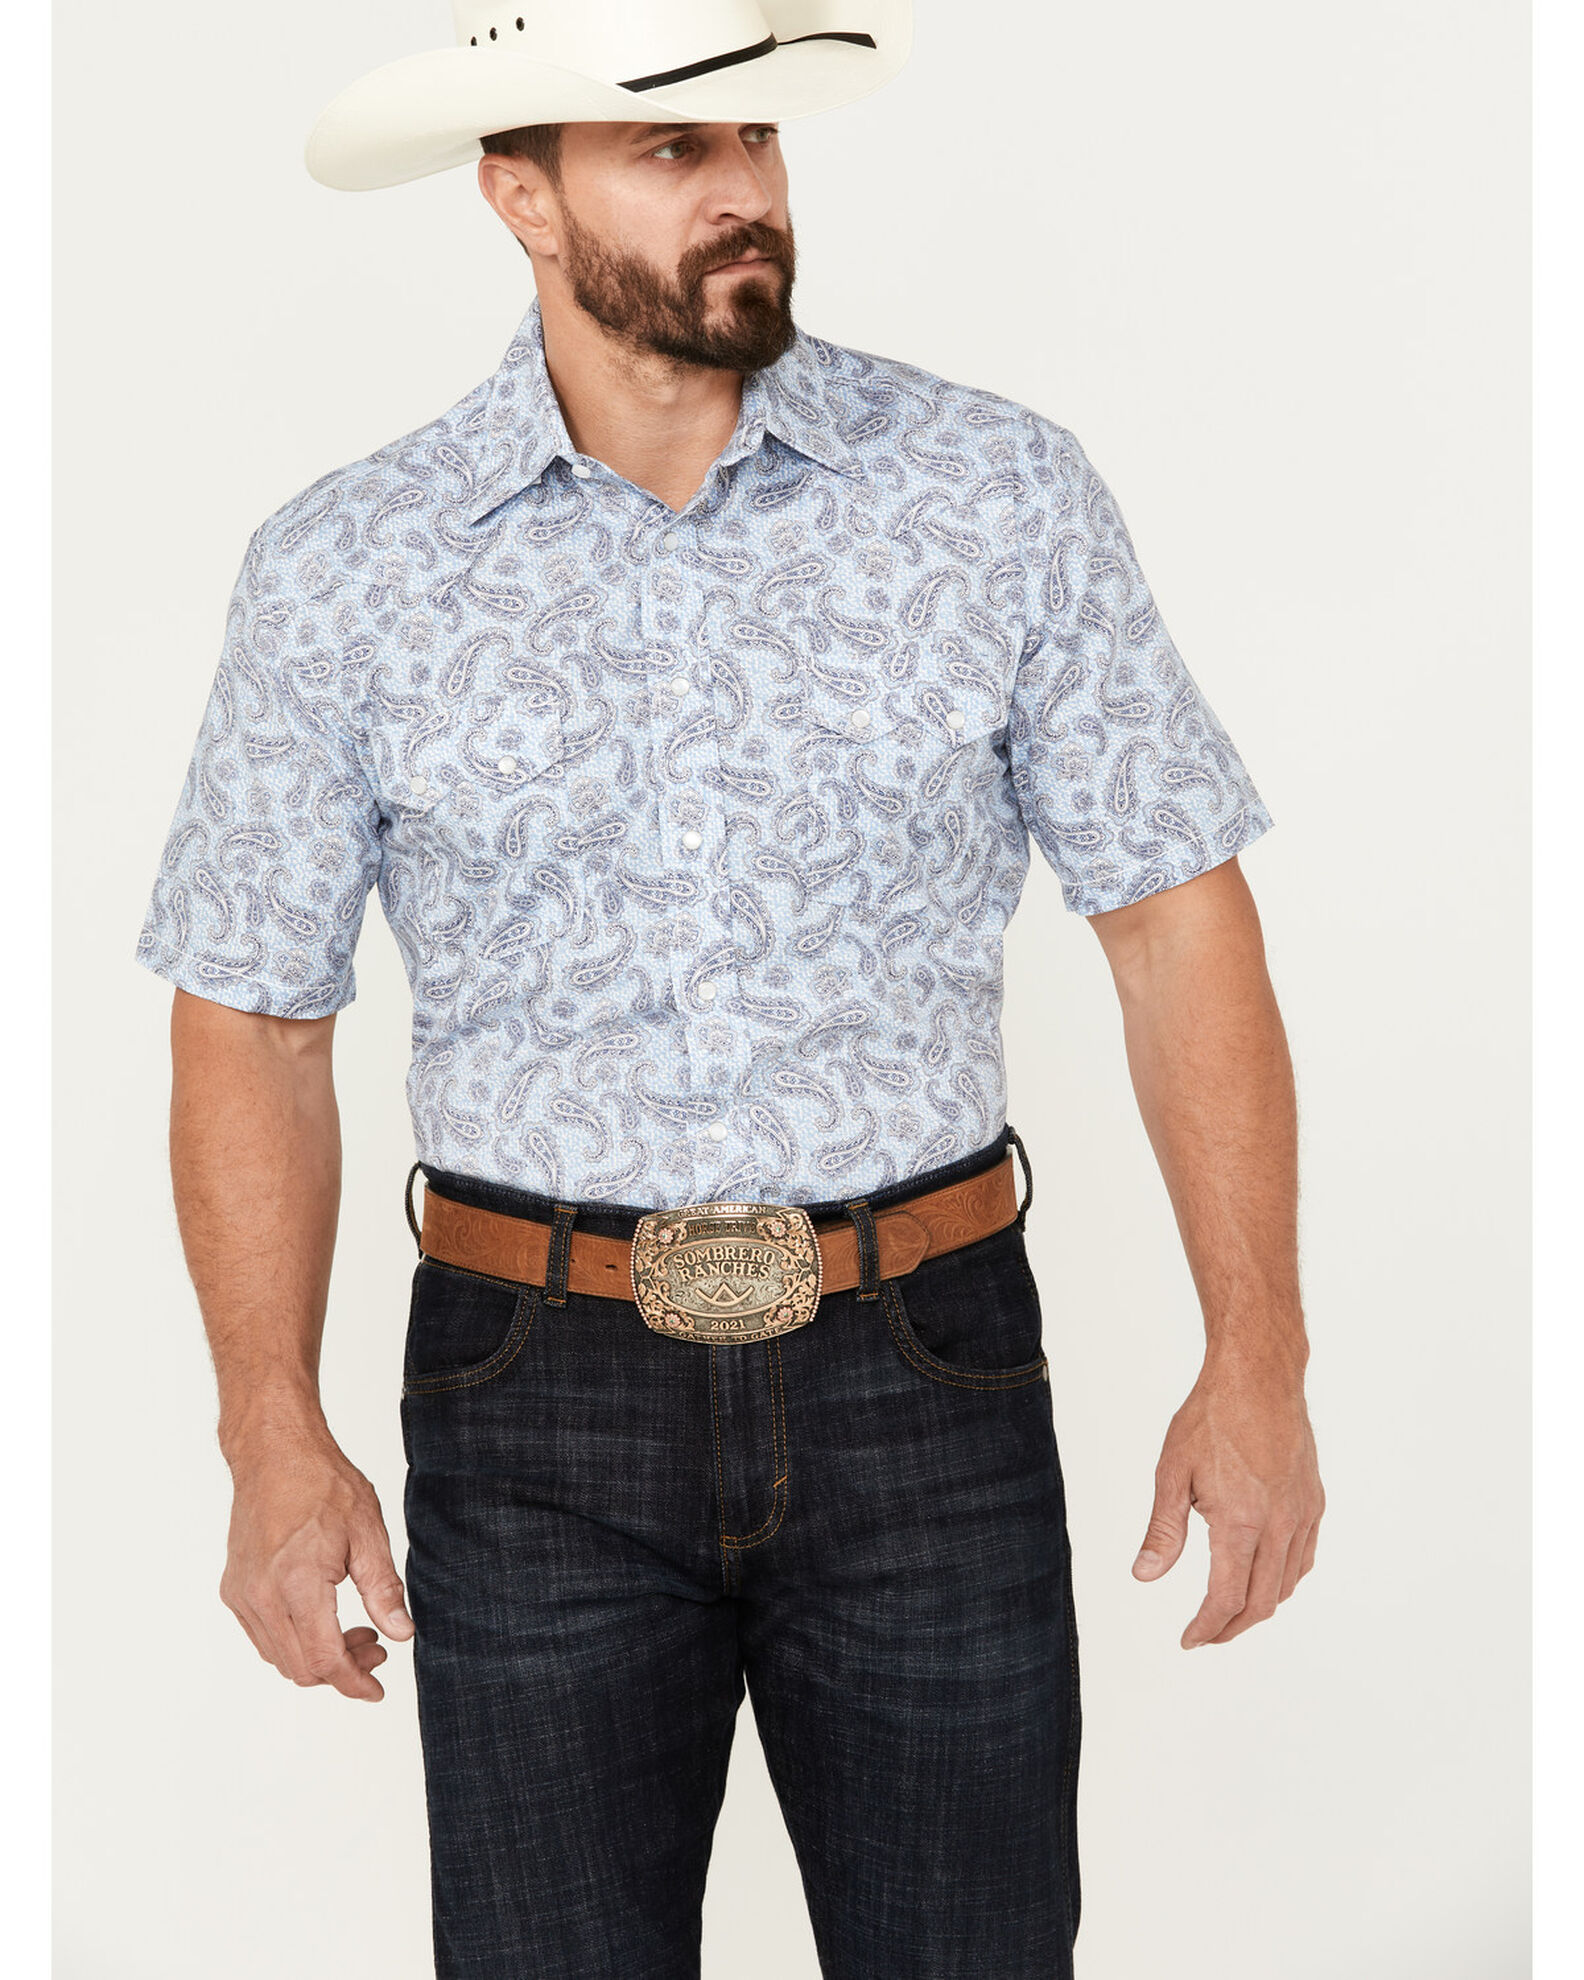 Rough Stock by Panhandle Men's Stretch Paisley Print Short Sleeve Pearl Snap Western Shirt